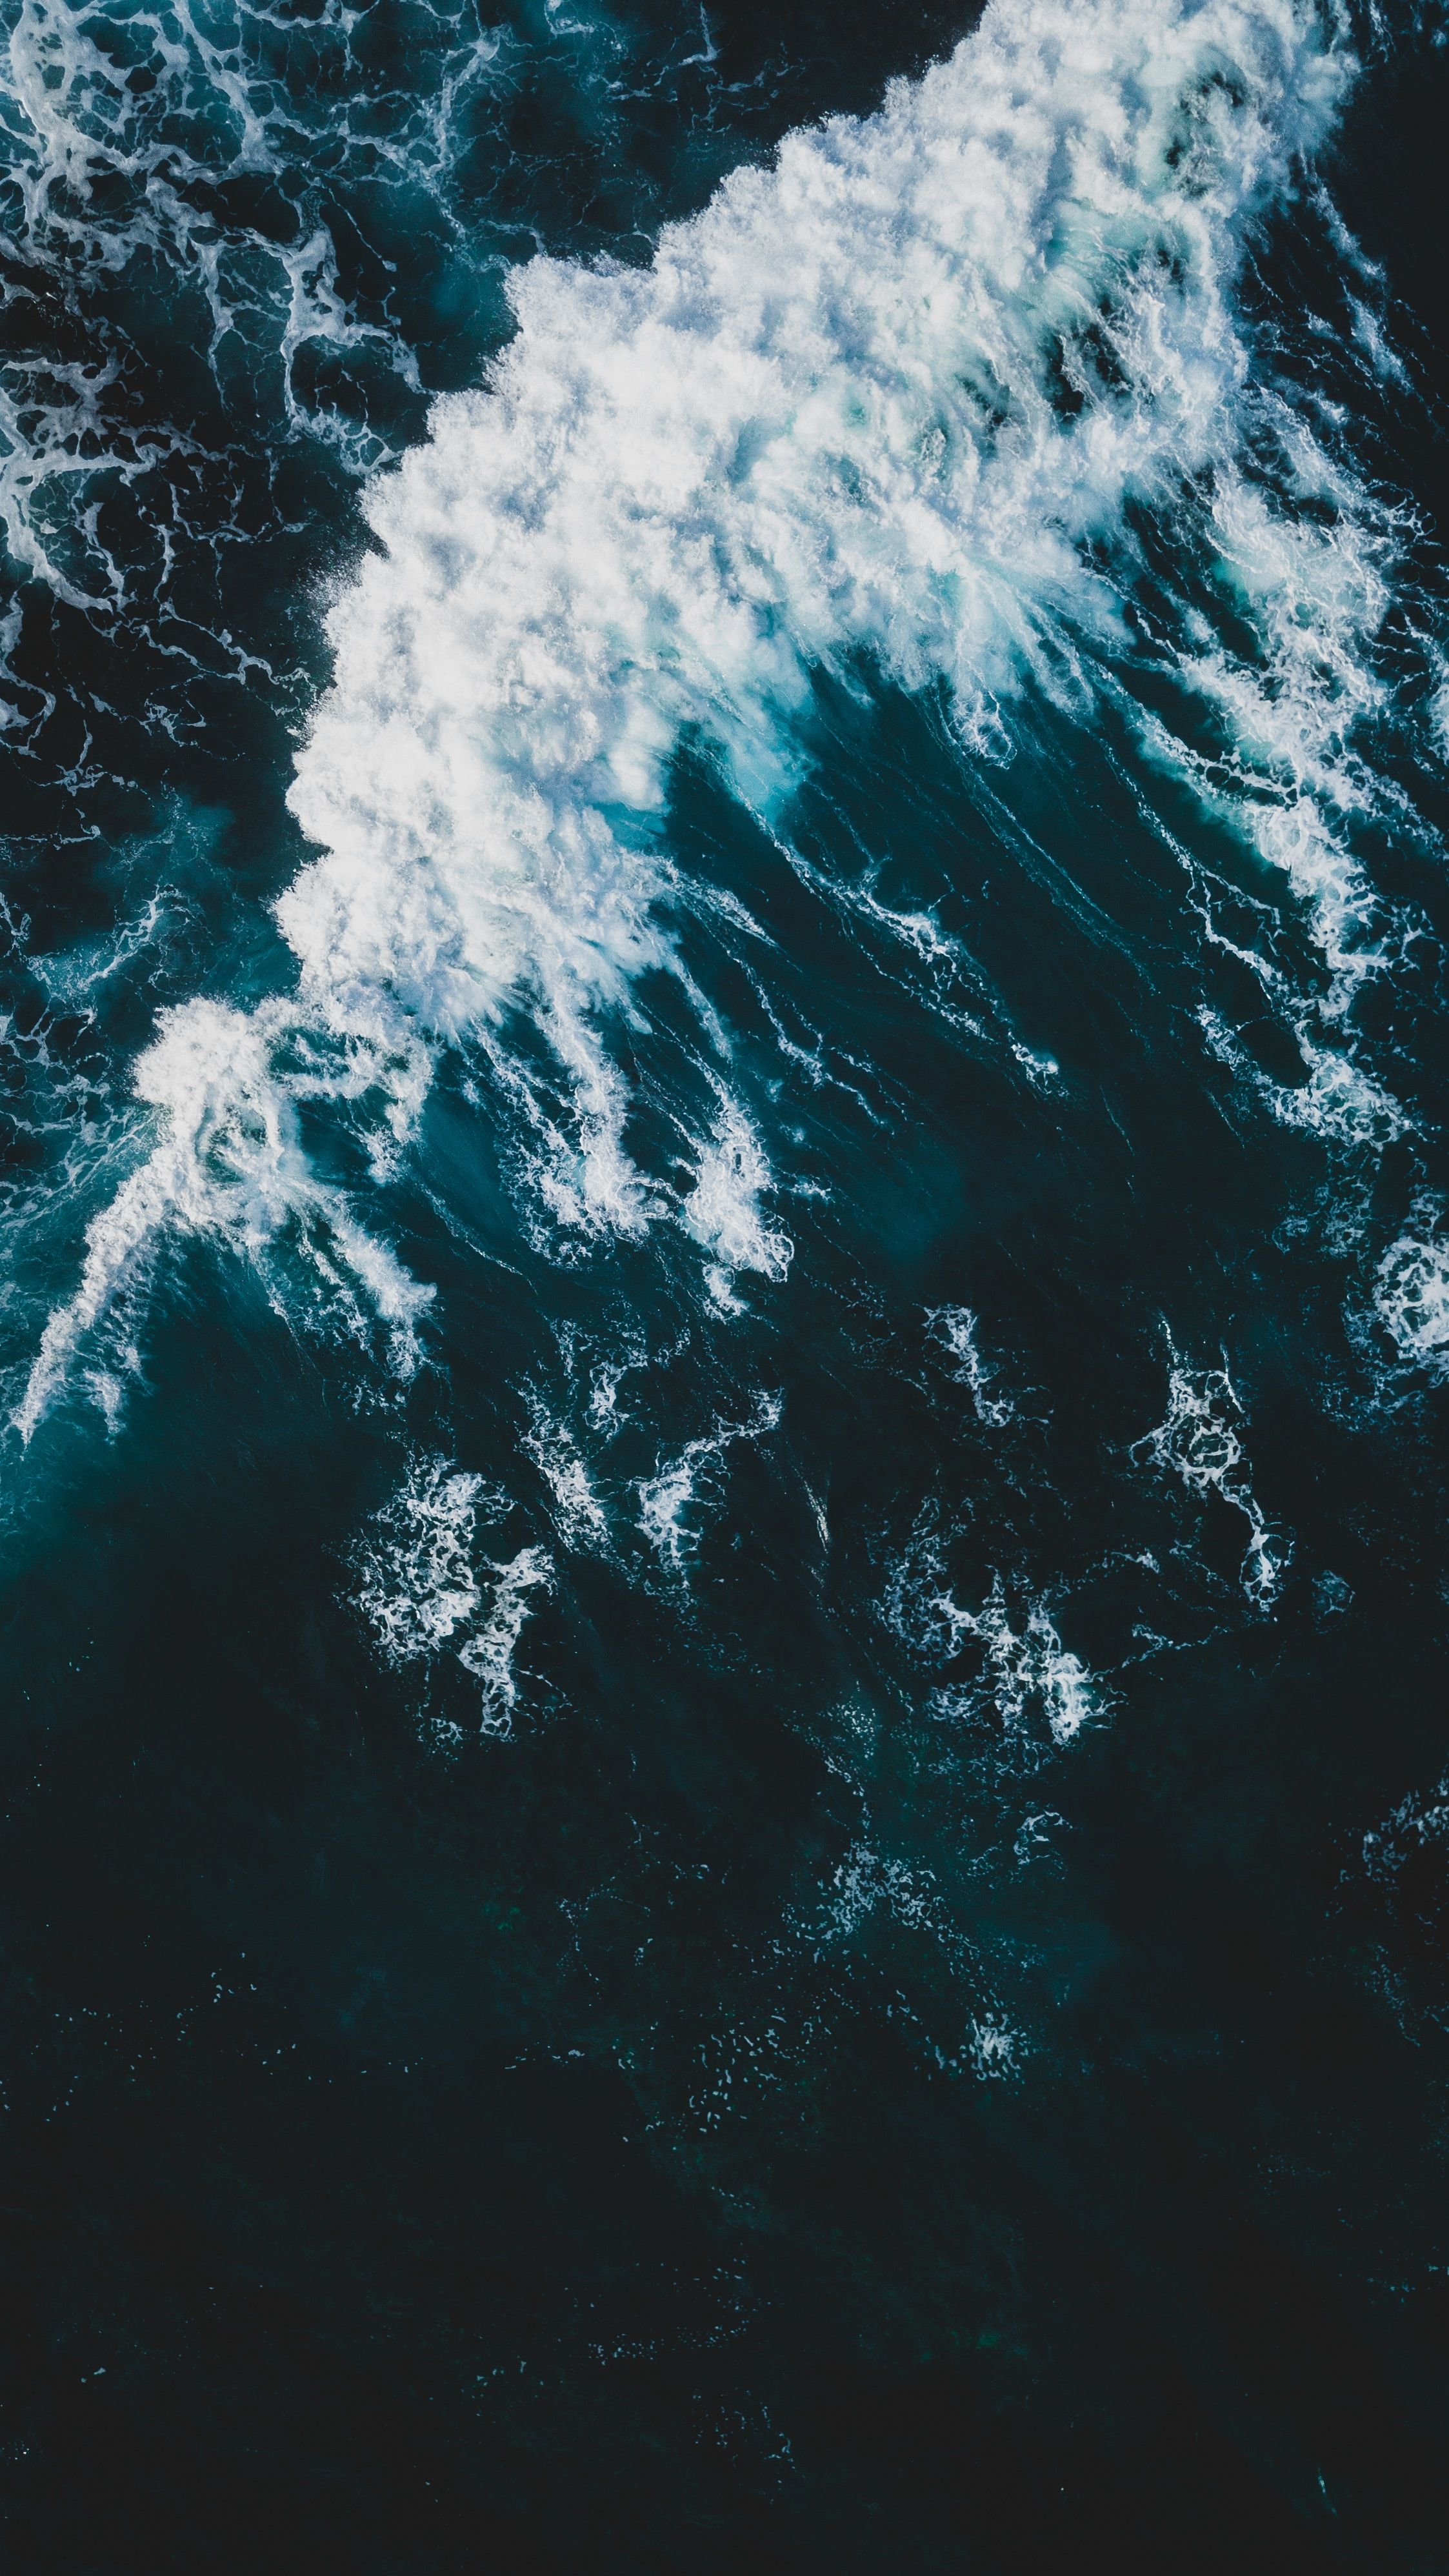 A photo of the ocean from above, with white crests and dark blue water. - Wave, water, ocean, underwater